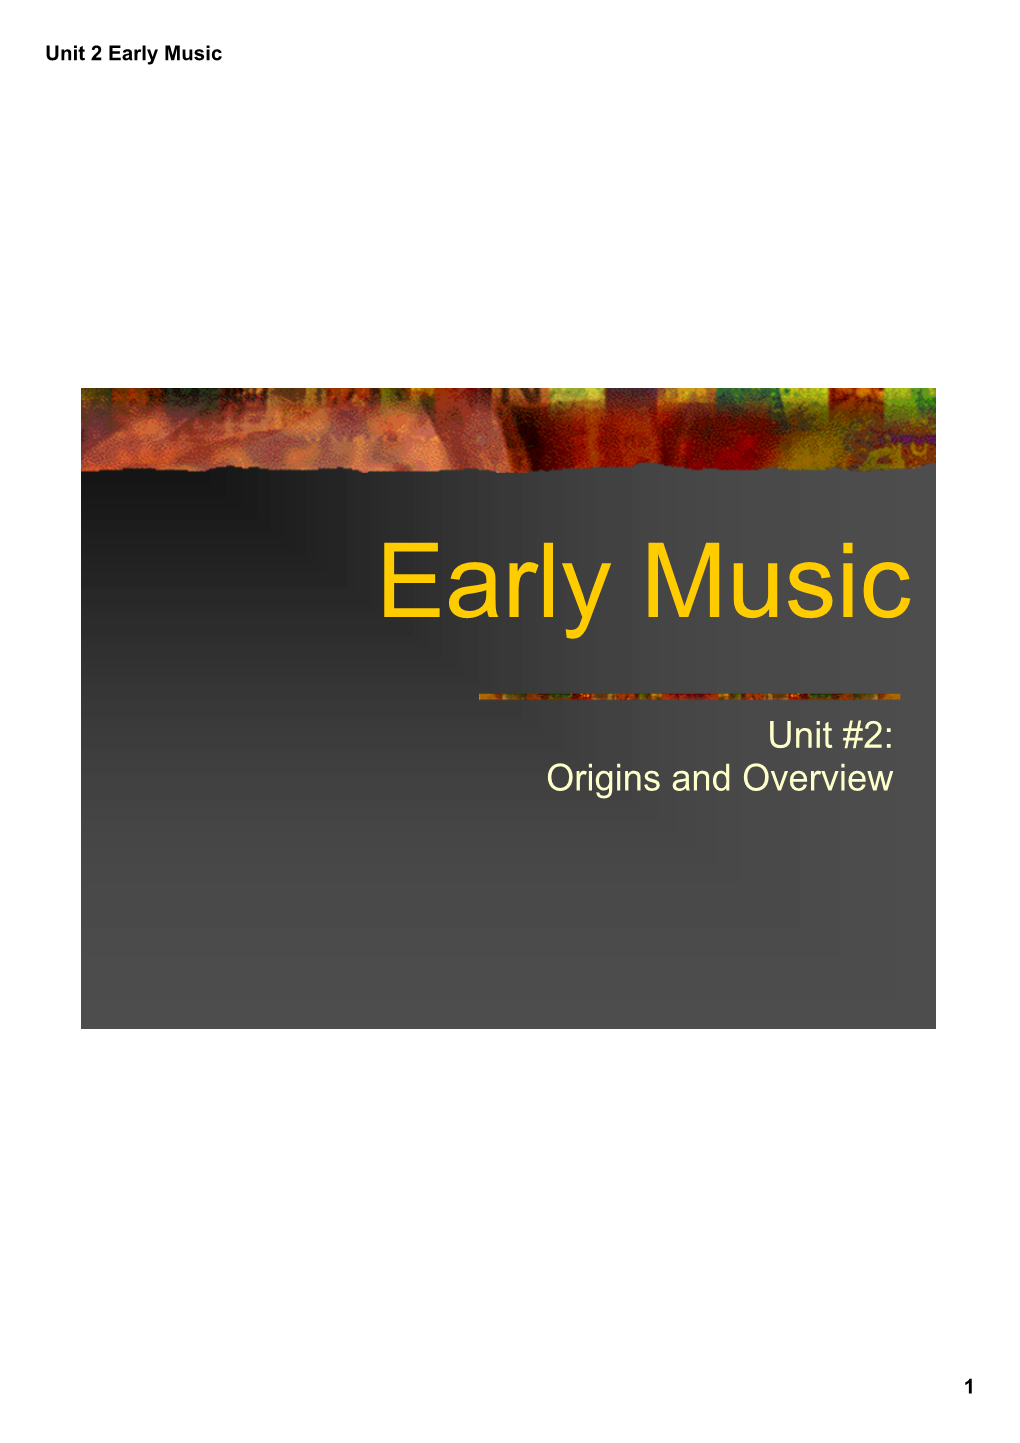 Unit 2 Early Music